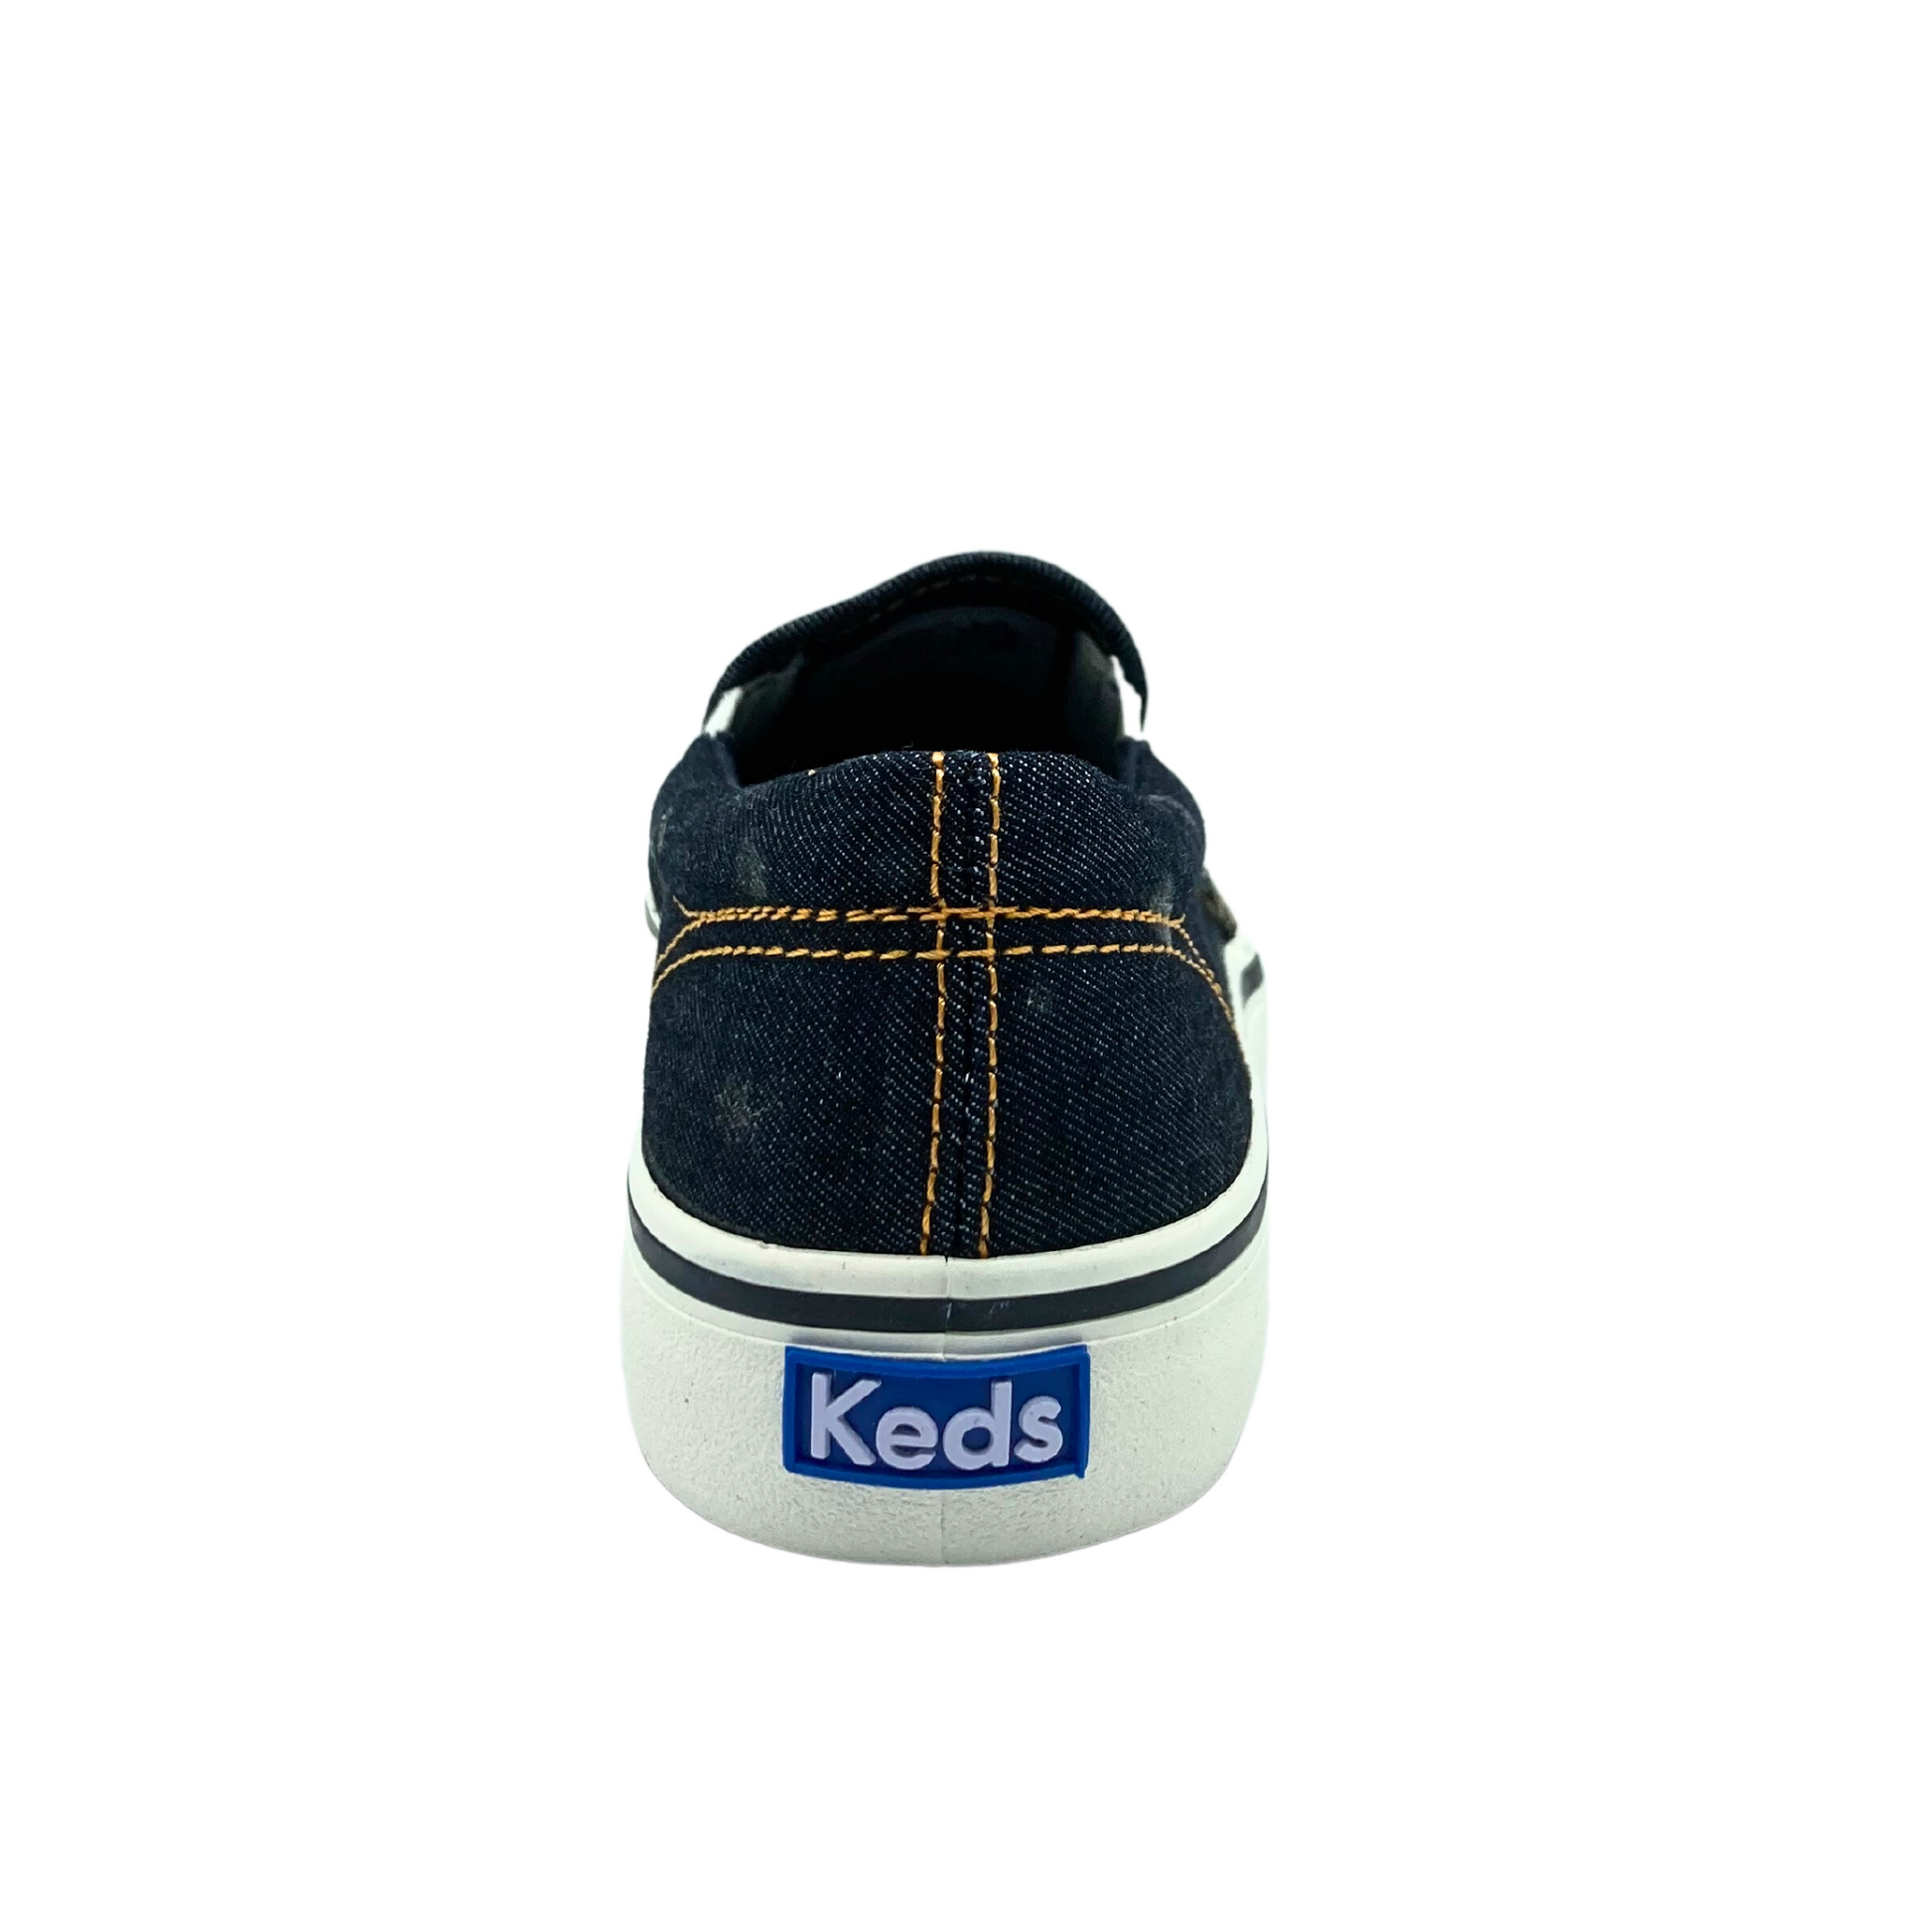 Rear view of a slip on canvas sneaker.   Black denim with yellow stitching around heel cup.  Keds logo on white outsole